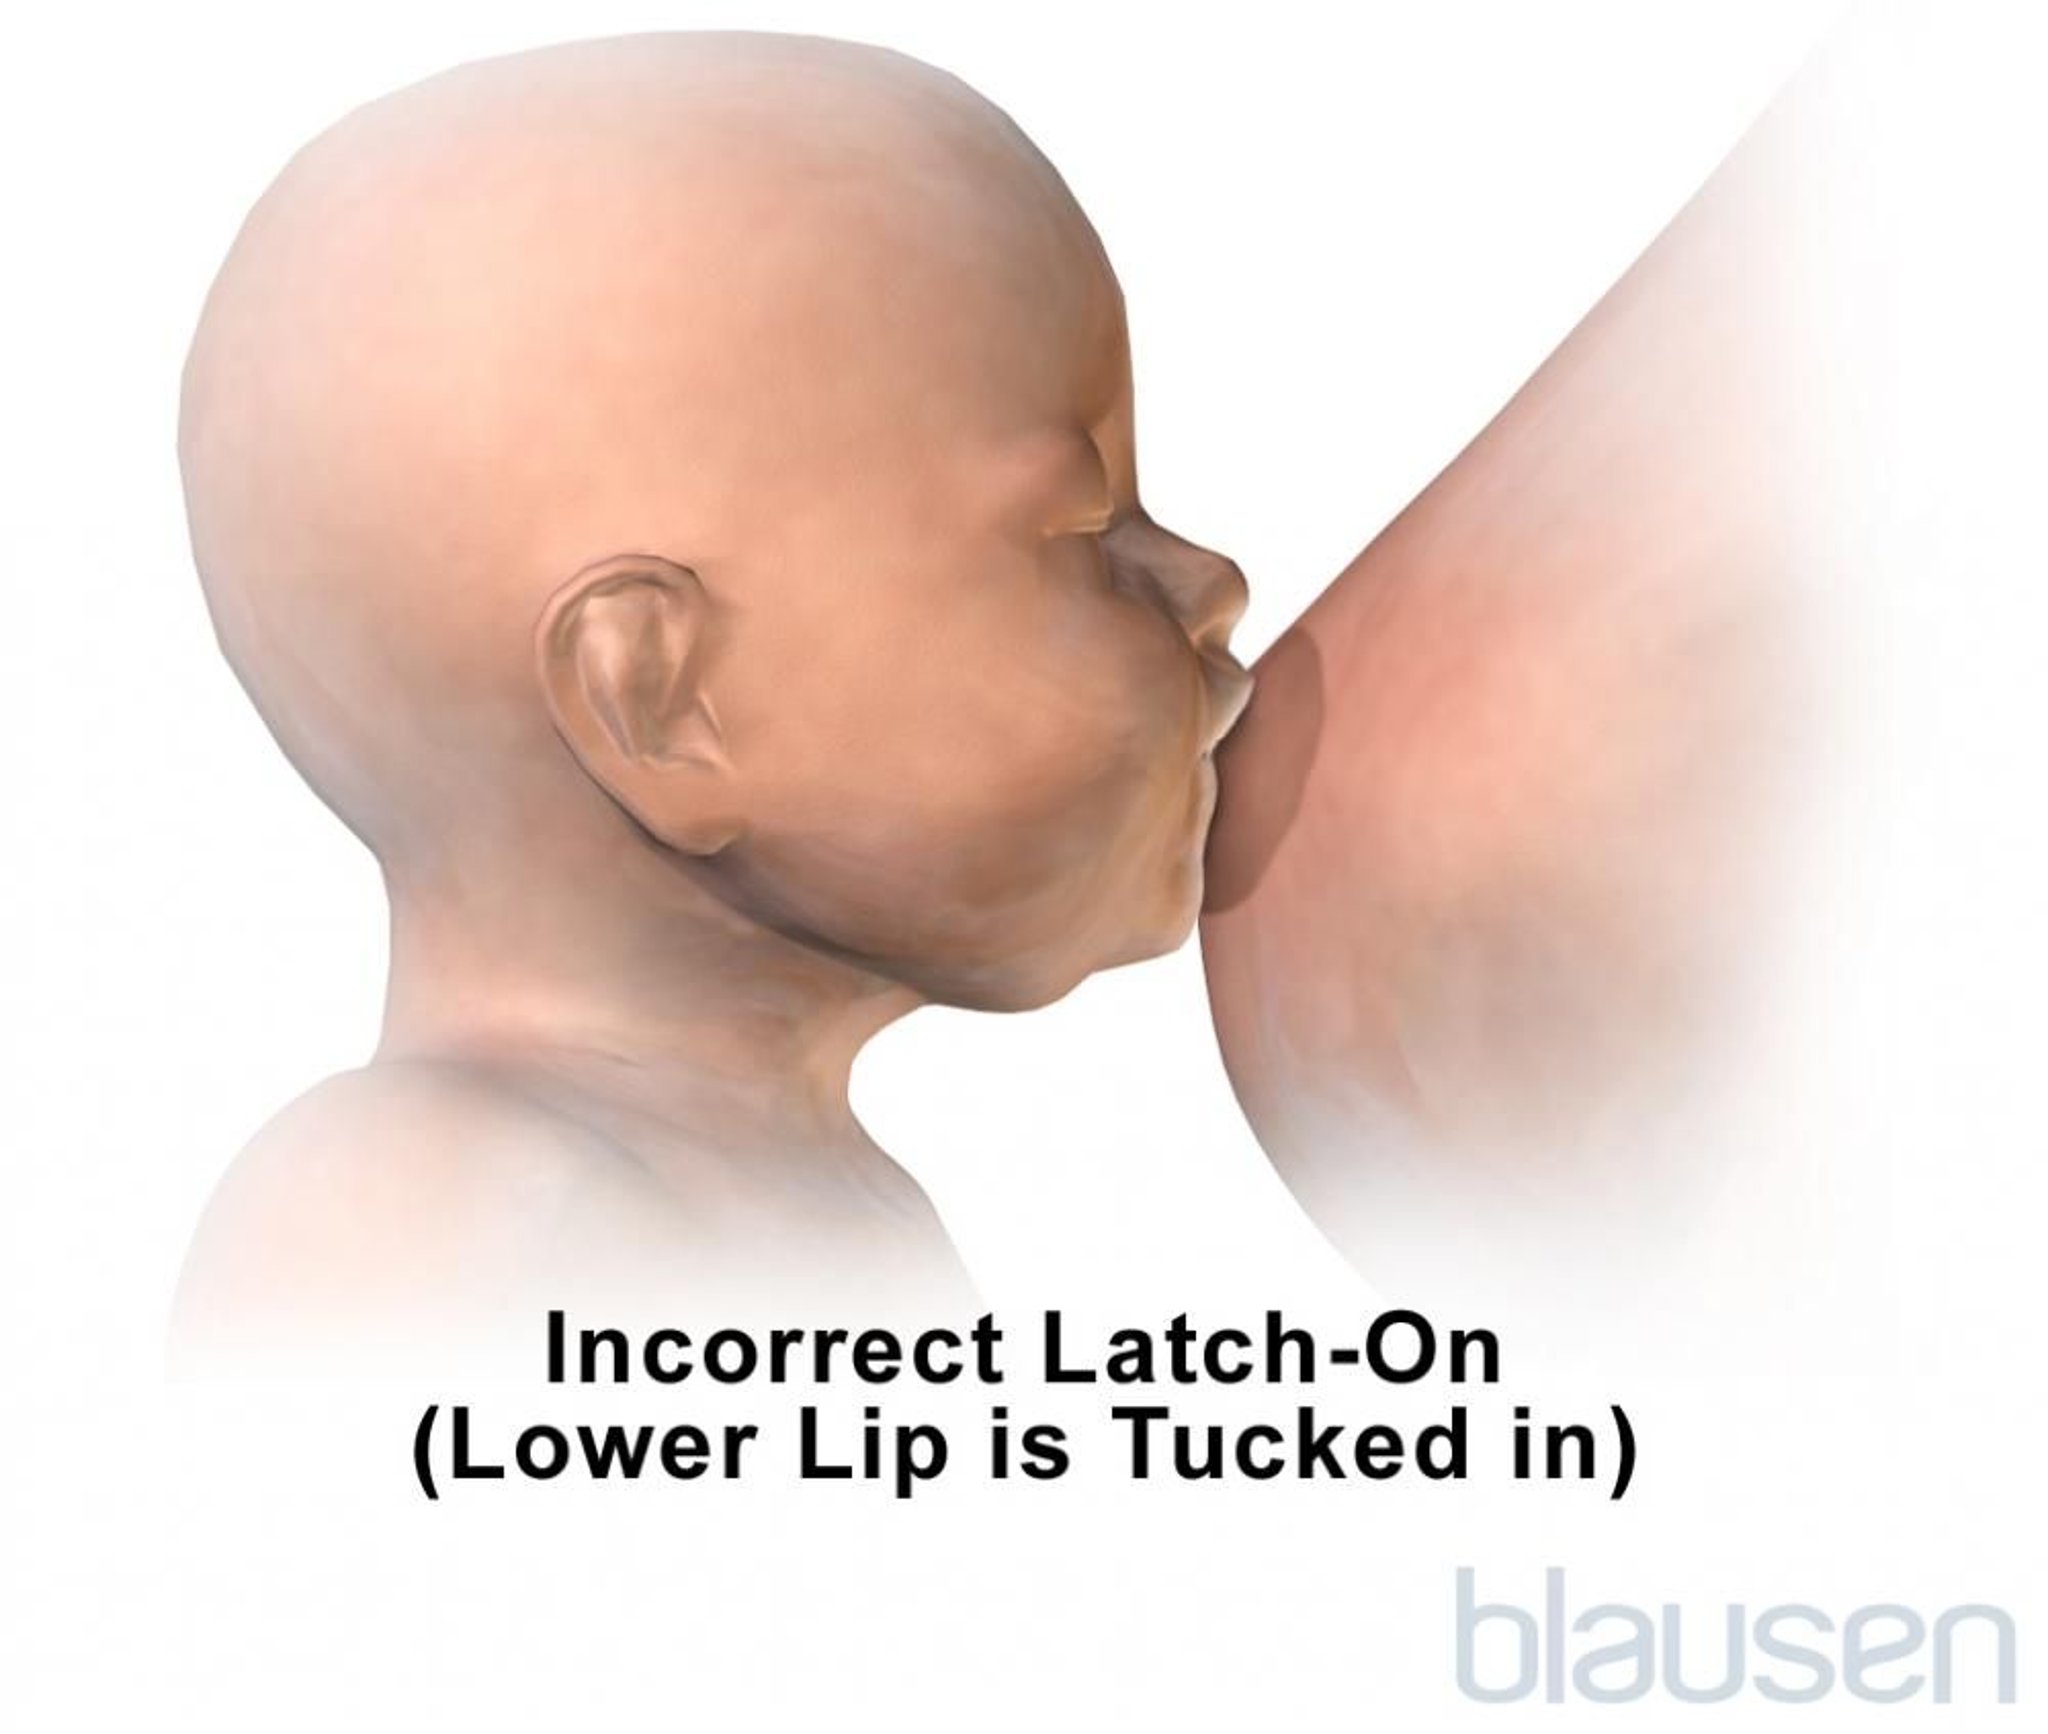 Incorrect Latch-On Position for Breastfeeding